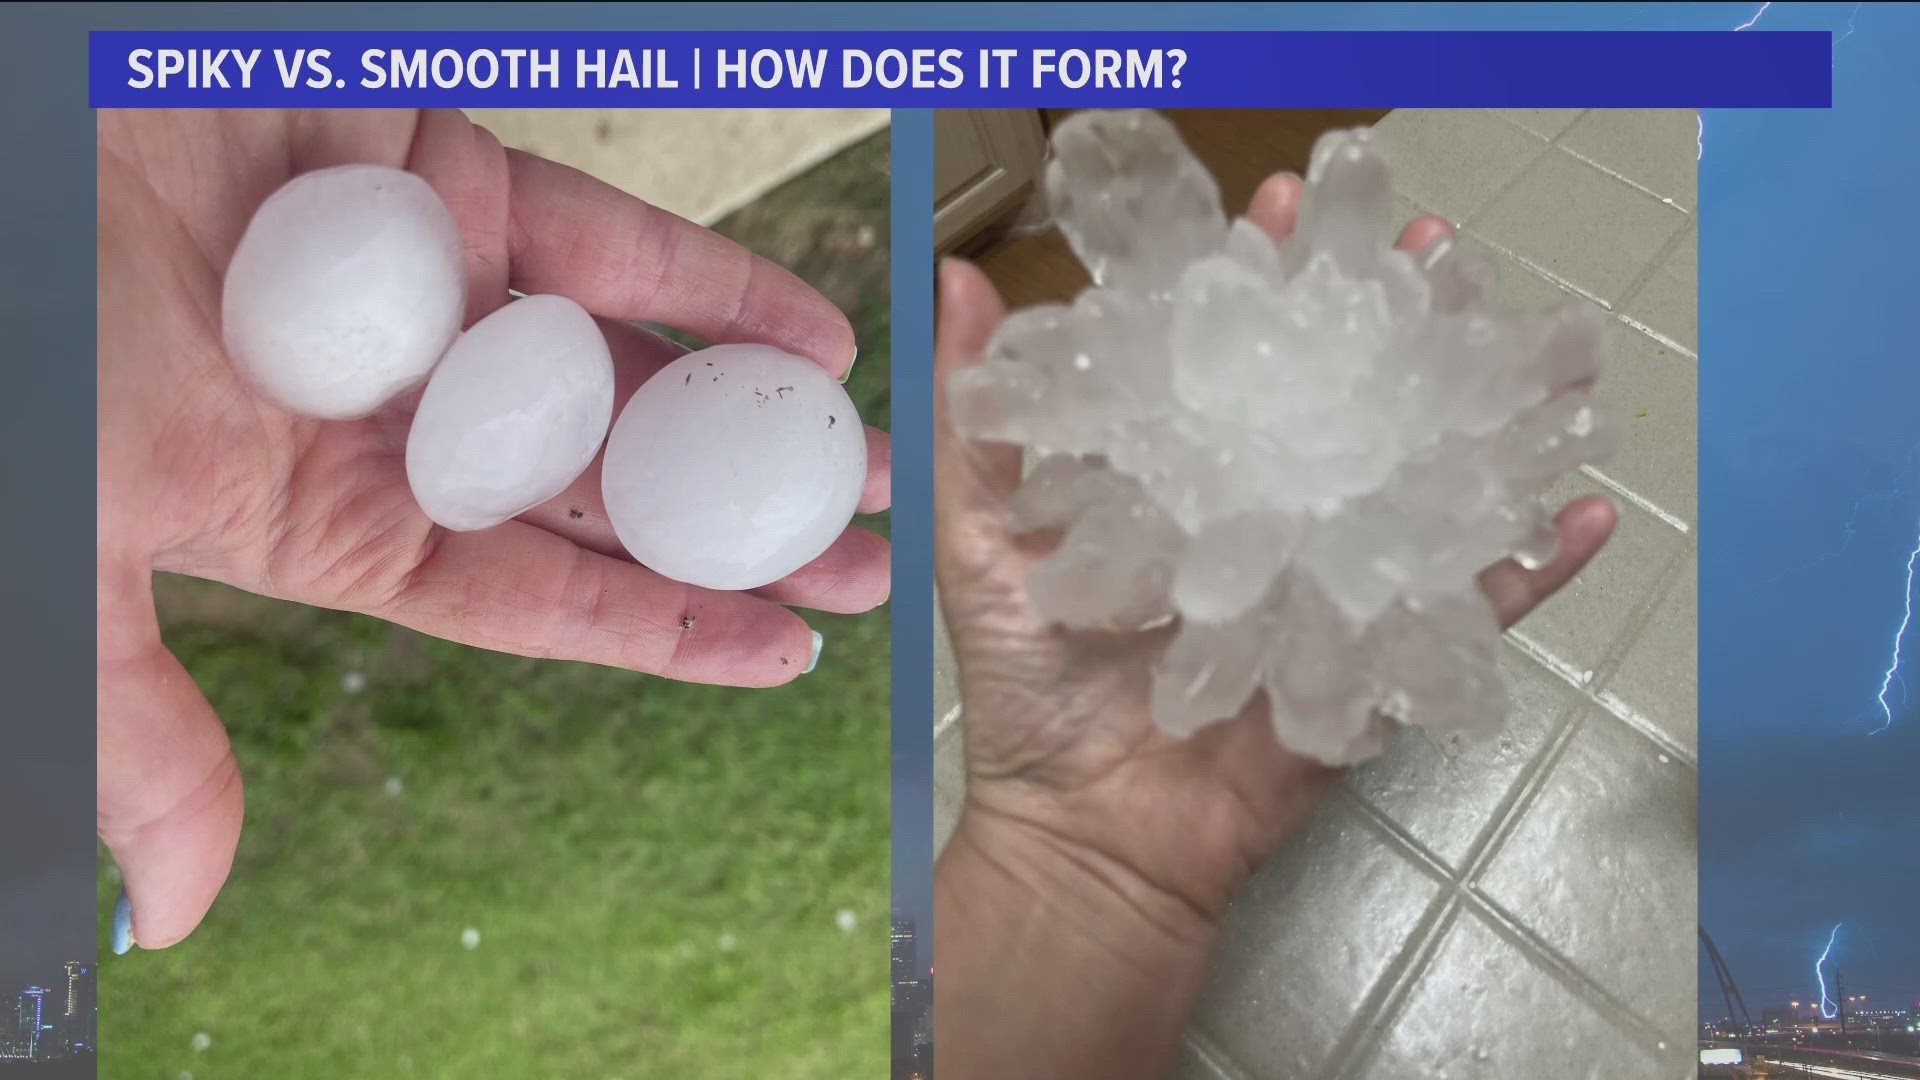 North Texas hail: Why is some spikey and others are smooth?